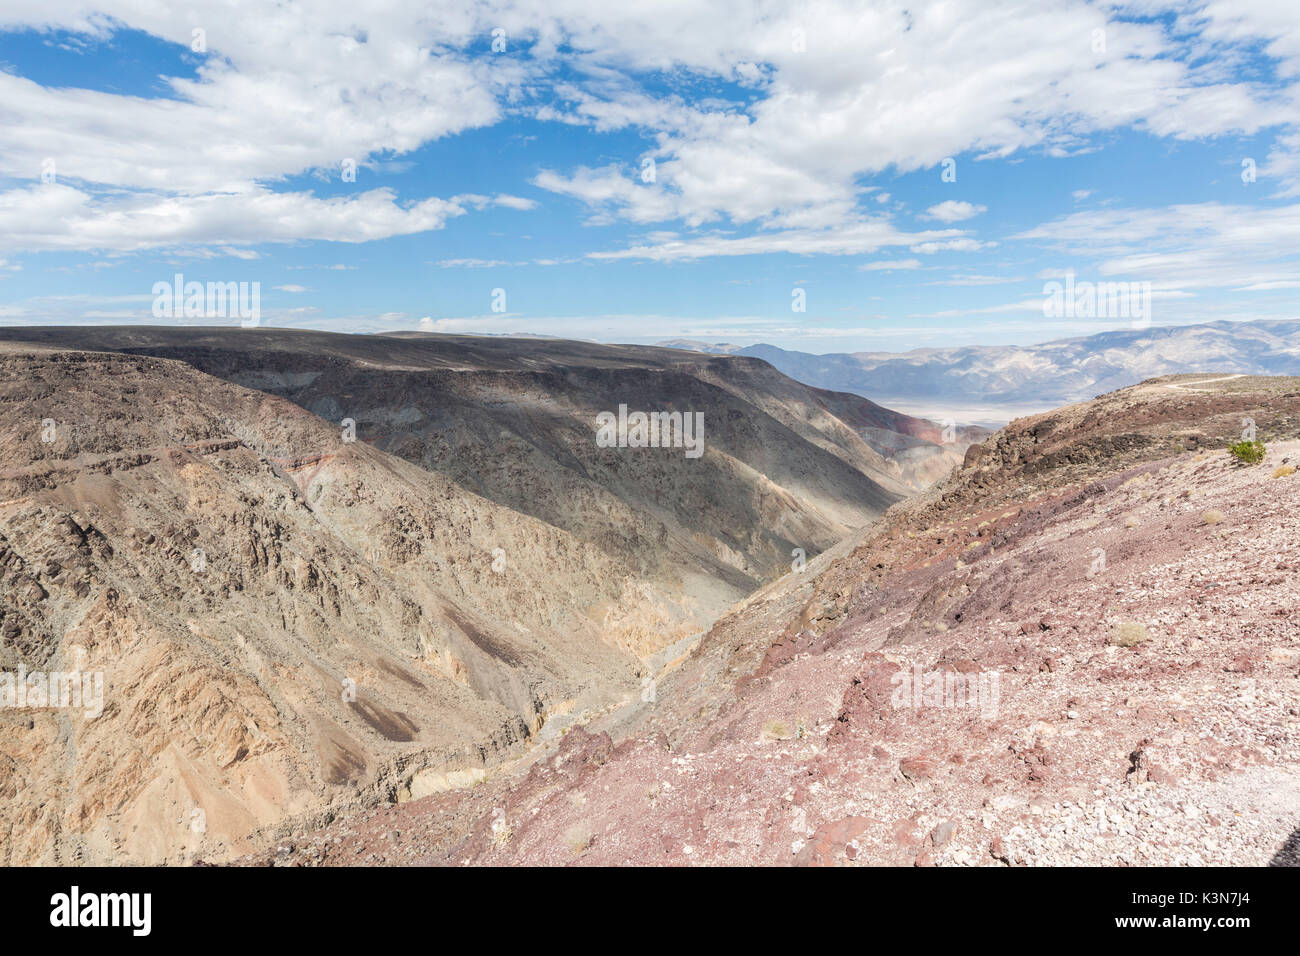 Desert landscape with bushes. Death Valley National Park, Inyo County, California, USA. Stock Photo